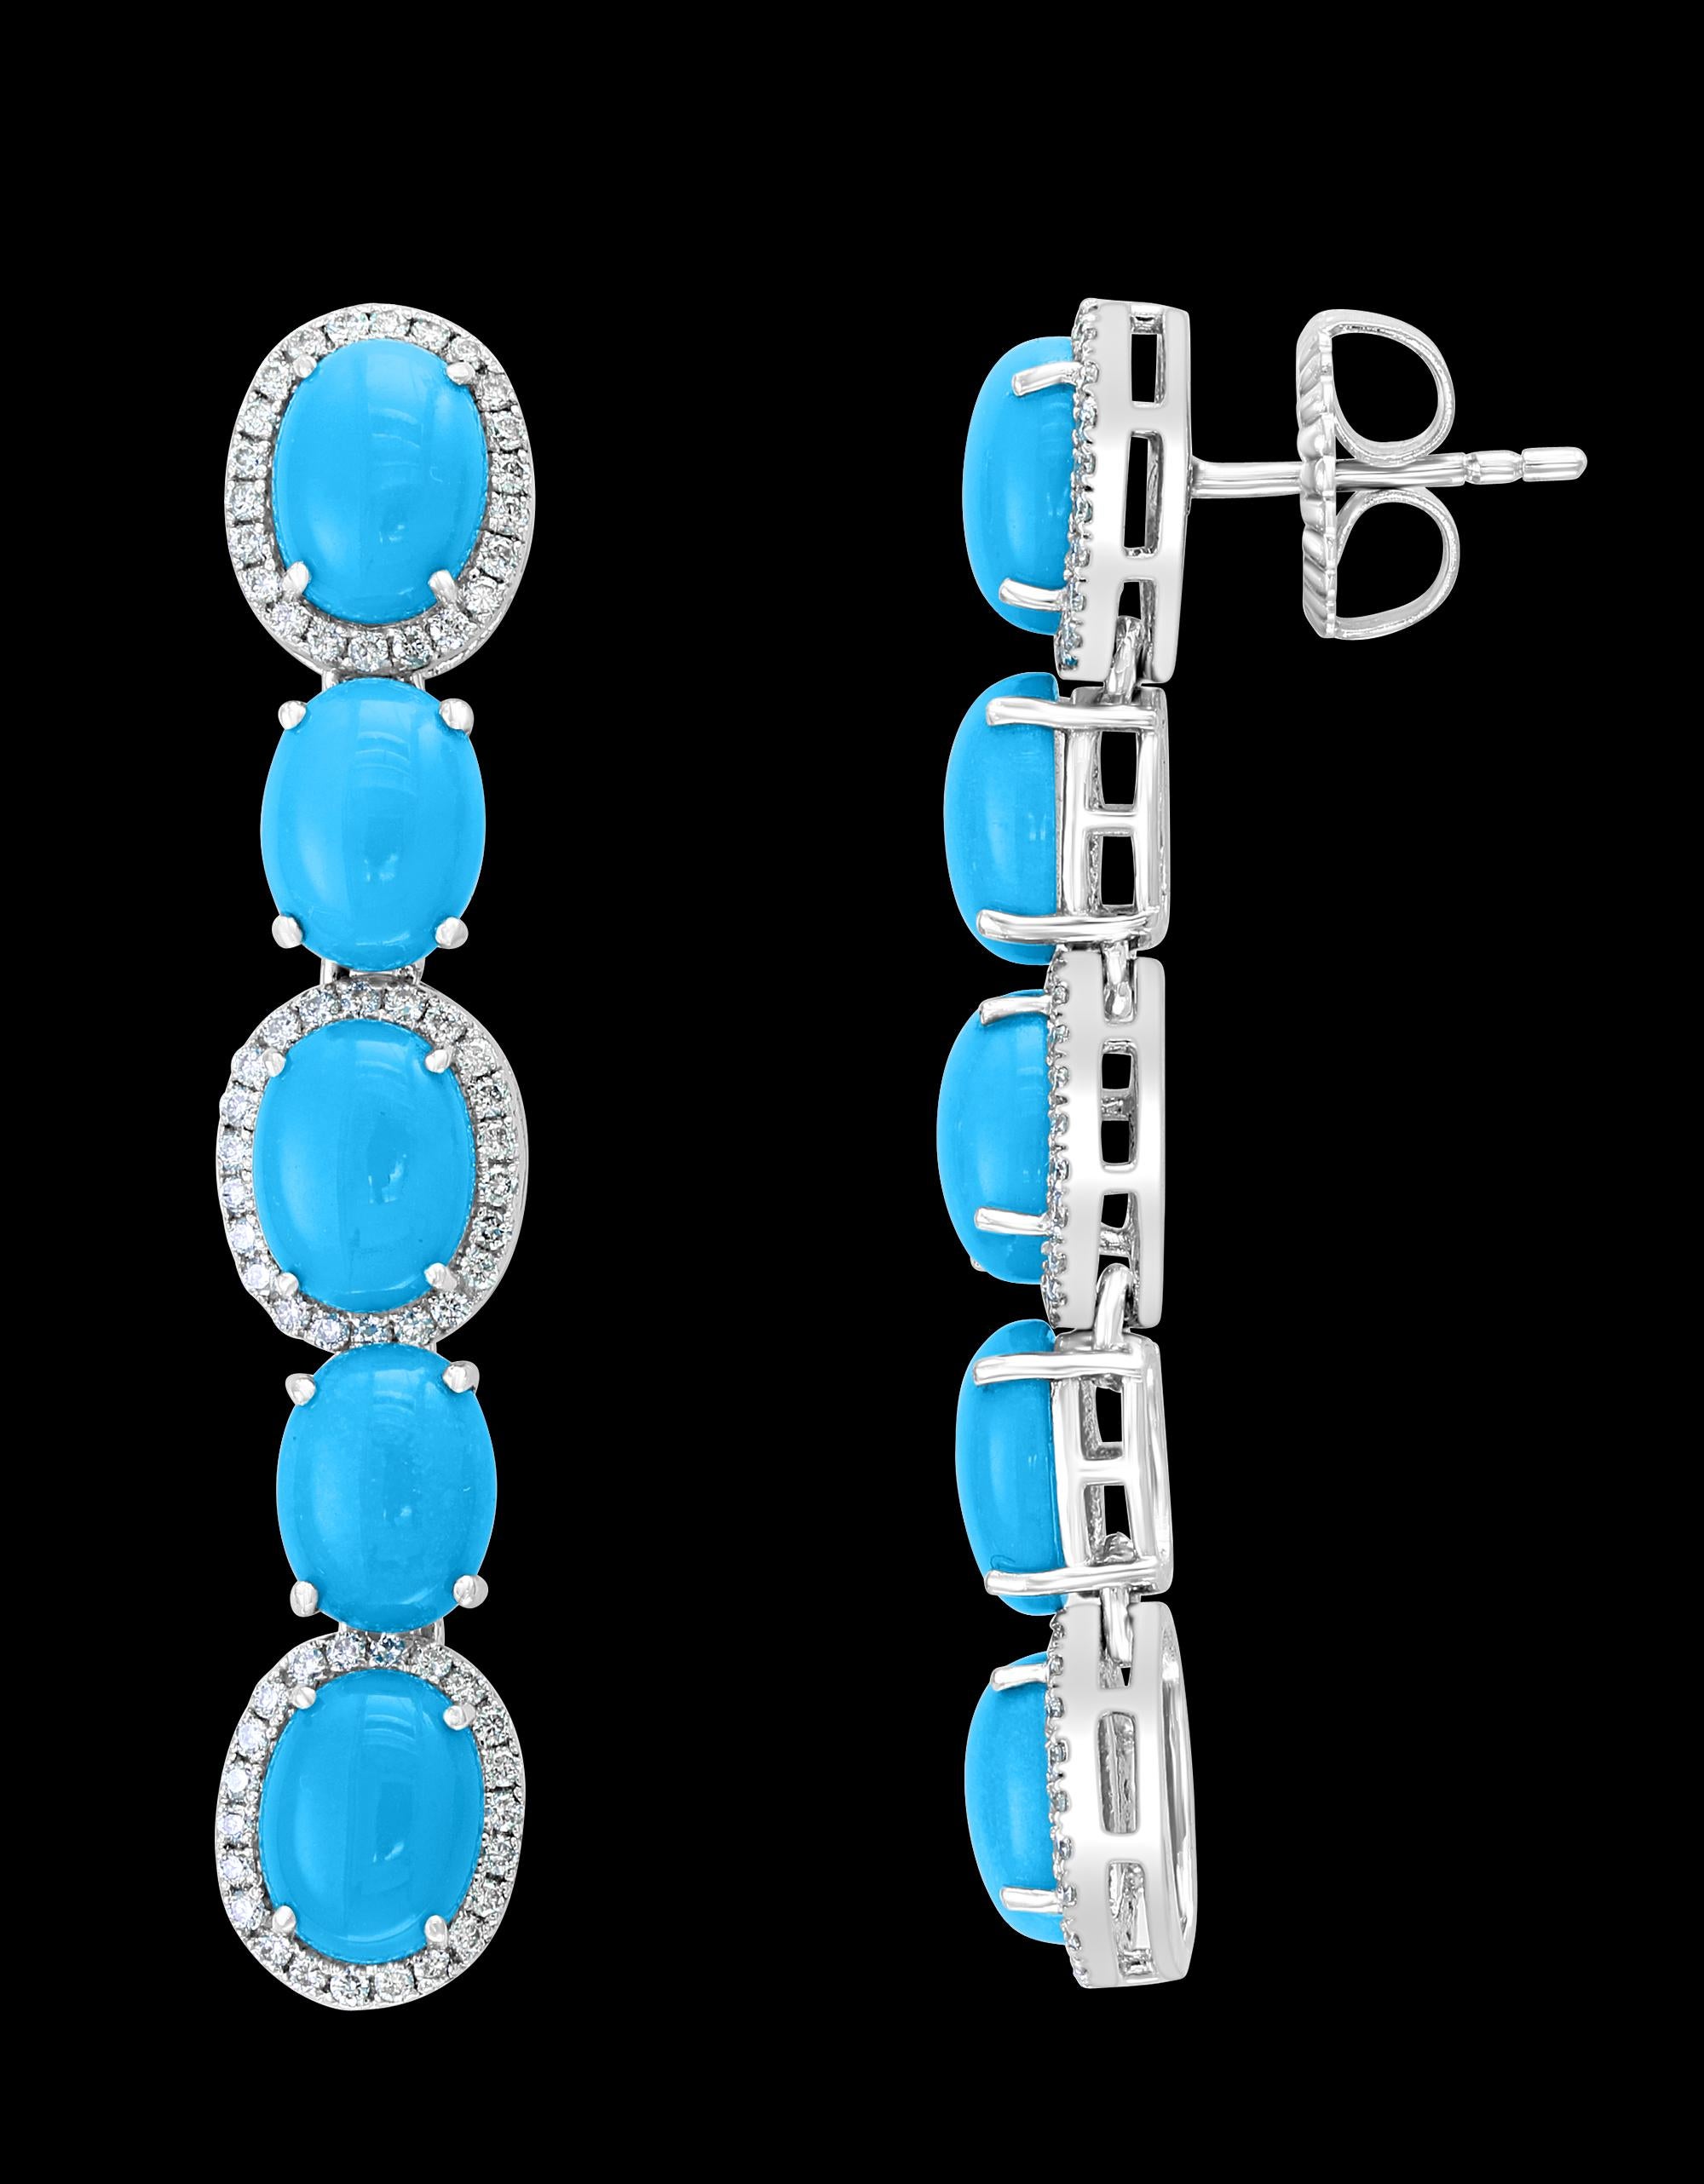 104 Carats Sleeping Beauty Turquoise Necklace & Earring Set, Bridal, 18 K Gold.
Natural Sleeping Beauty Turquoise which is very hard to find now.
Necklace , Earrings 
Diamonds 3.8 Carats
Gold: 18 carat White Gold 62 Grams

All our jewelry comes with